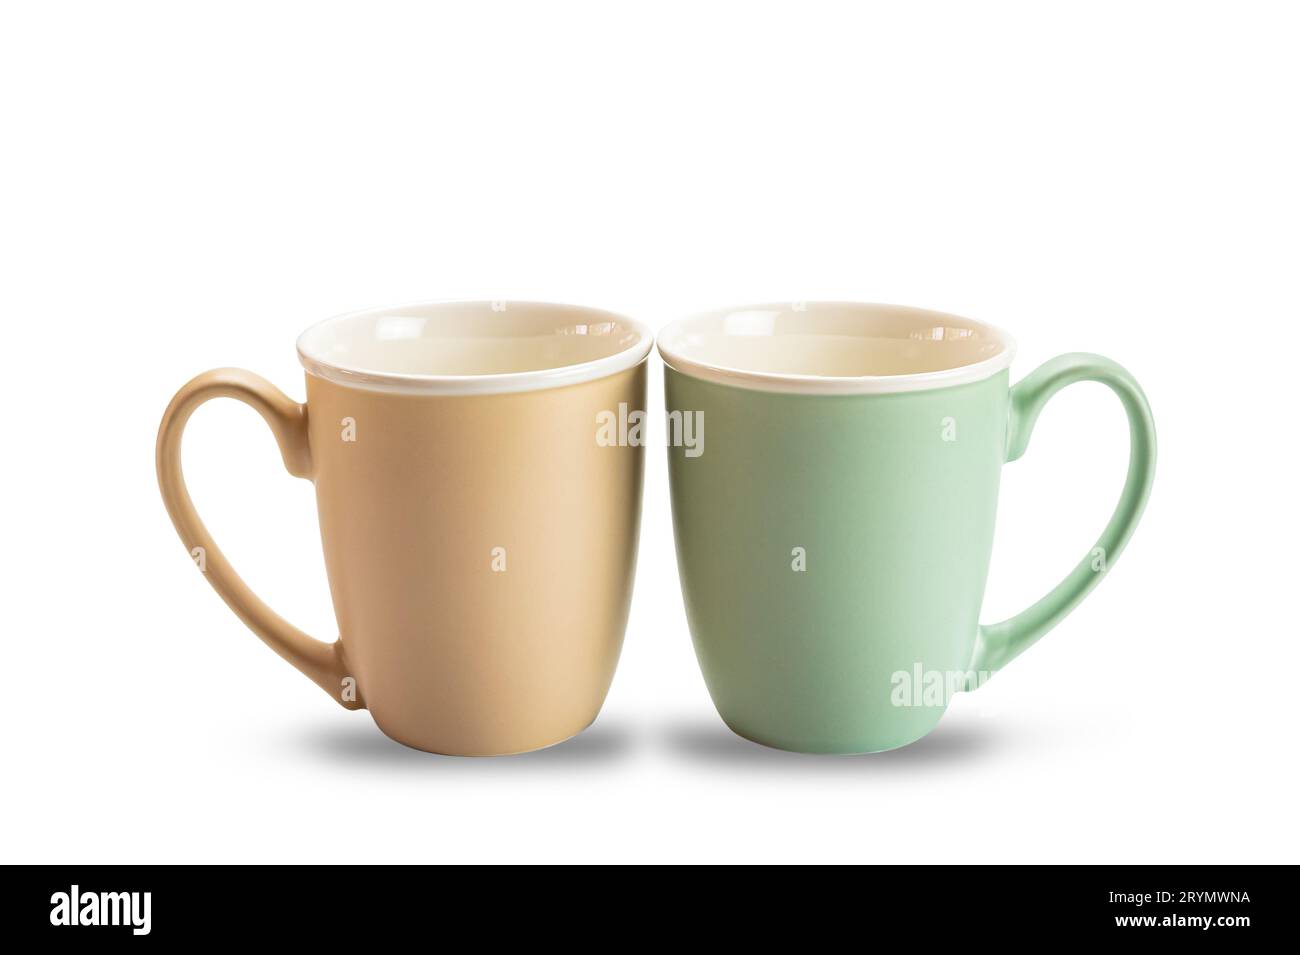 https://c8.alamy.com/comp/2RYMWNA/side-view-of-two-empty-ceramic-coffee-mugs-brown-and-green-isolated-on-white-background-2RYMWNA.jpg